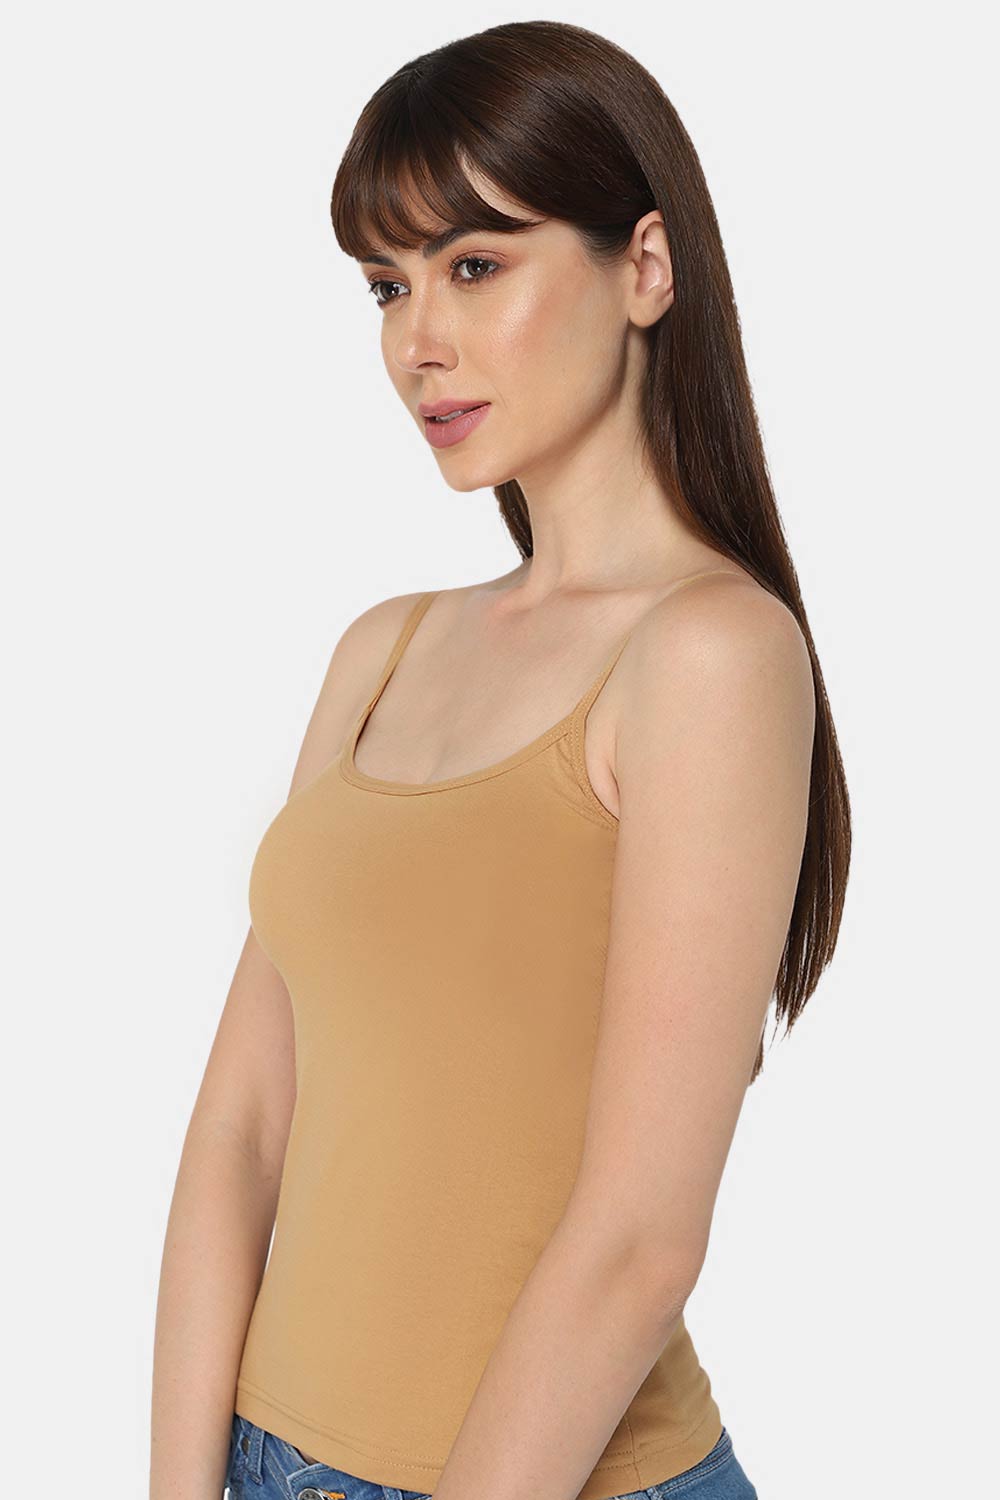 Intimacy Super Stretch Camisole Special Combo Pack - Cl01 - Pack of 2 - C01